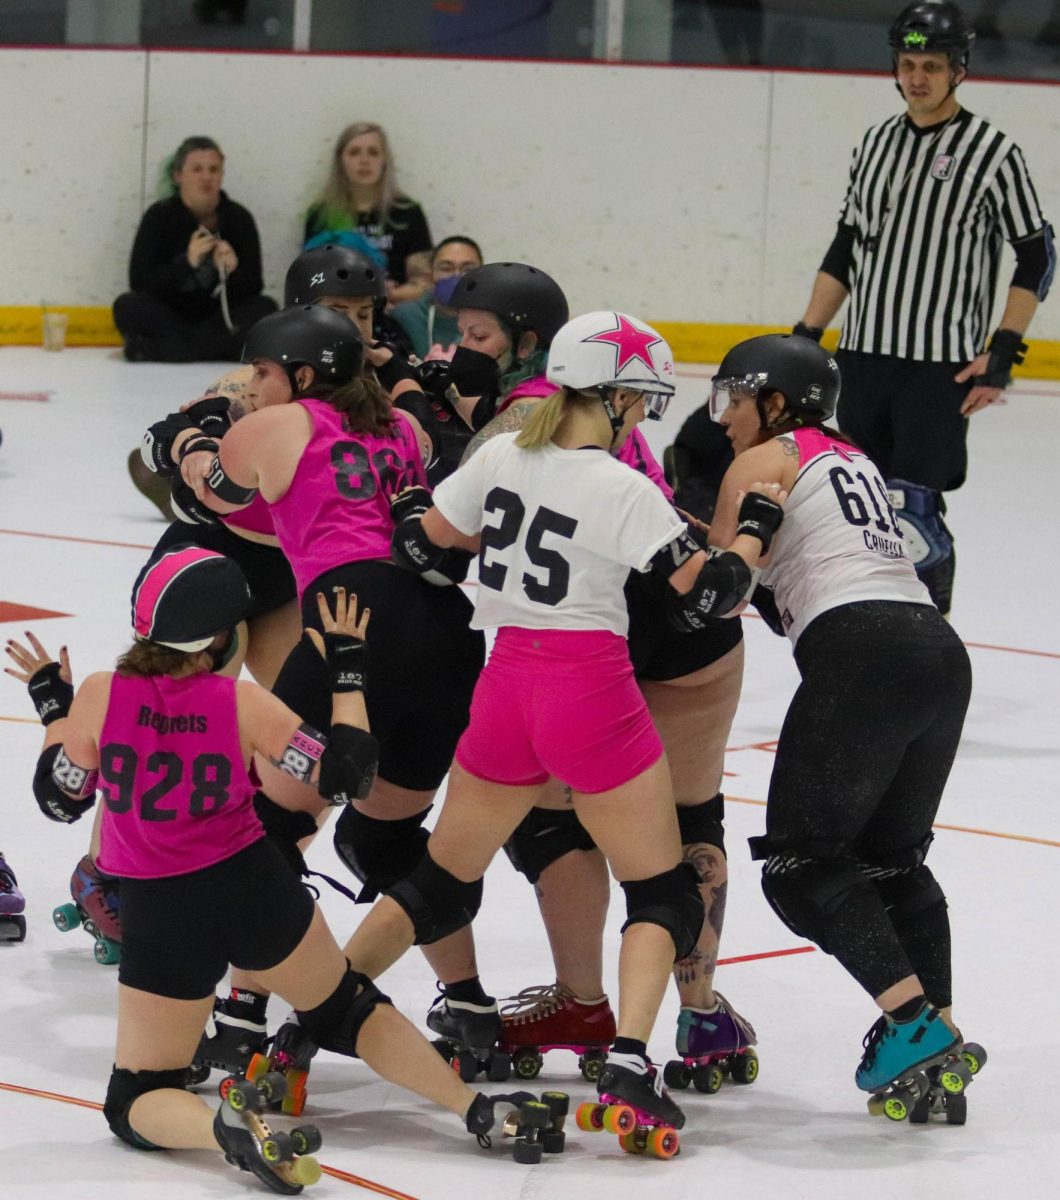 The jammer on the white team, number 25, attempts to get through the pack as the pink teams pivot, number 928, holds her hands up in the air during the final scrimmage on the night of Feb. 17. There are red lines around the track that players are not allowed to go in or outside of, which is why 928 is holding up her hands, as anyone outside of the track cannot interact with those inside. Players who skate off of the track have to skate outside and reenter at the back of the pack.

[Roller derby] is football on skates with no ball, junior derby player Abbie Wann said.
Well, its kind of like that, but it’s not that hard, junior derby player Maeko King said.
